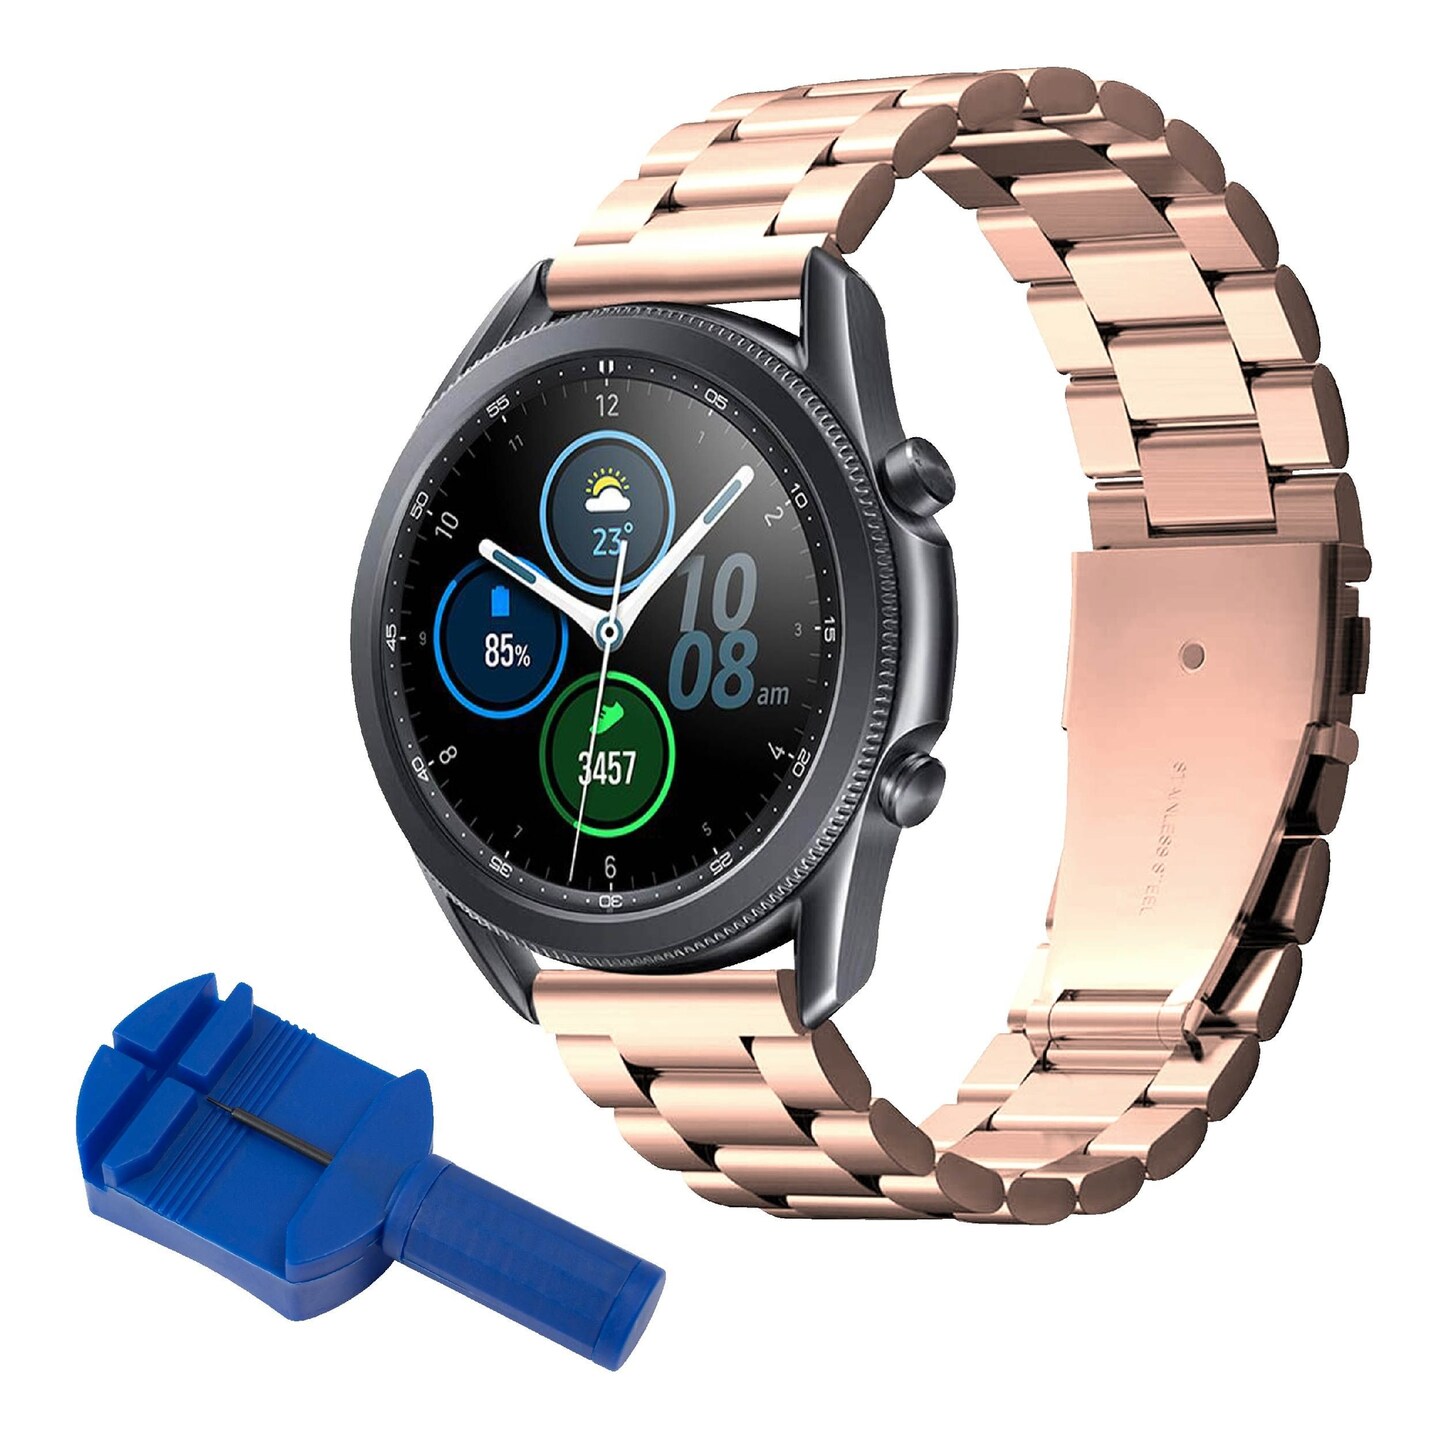 Insten Stainless Steel Metal Band For Samsung Galaxy Watch 4 40mm 44mm / Watch 4 Classic 42mm 46mm / Watch 3 41mm / Active 2, Replacement Strap with Link Adjustment Tool For Women Men, Rose Gold